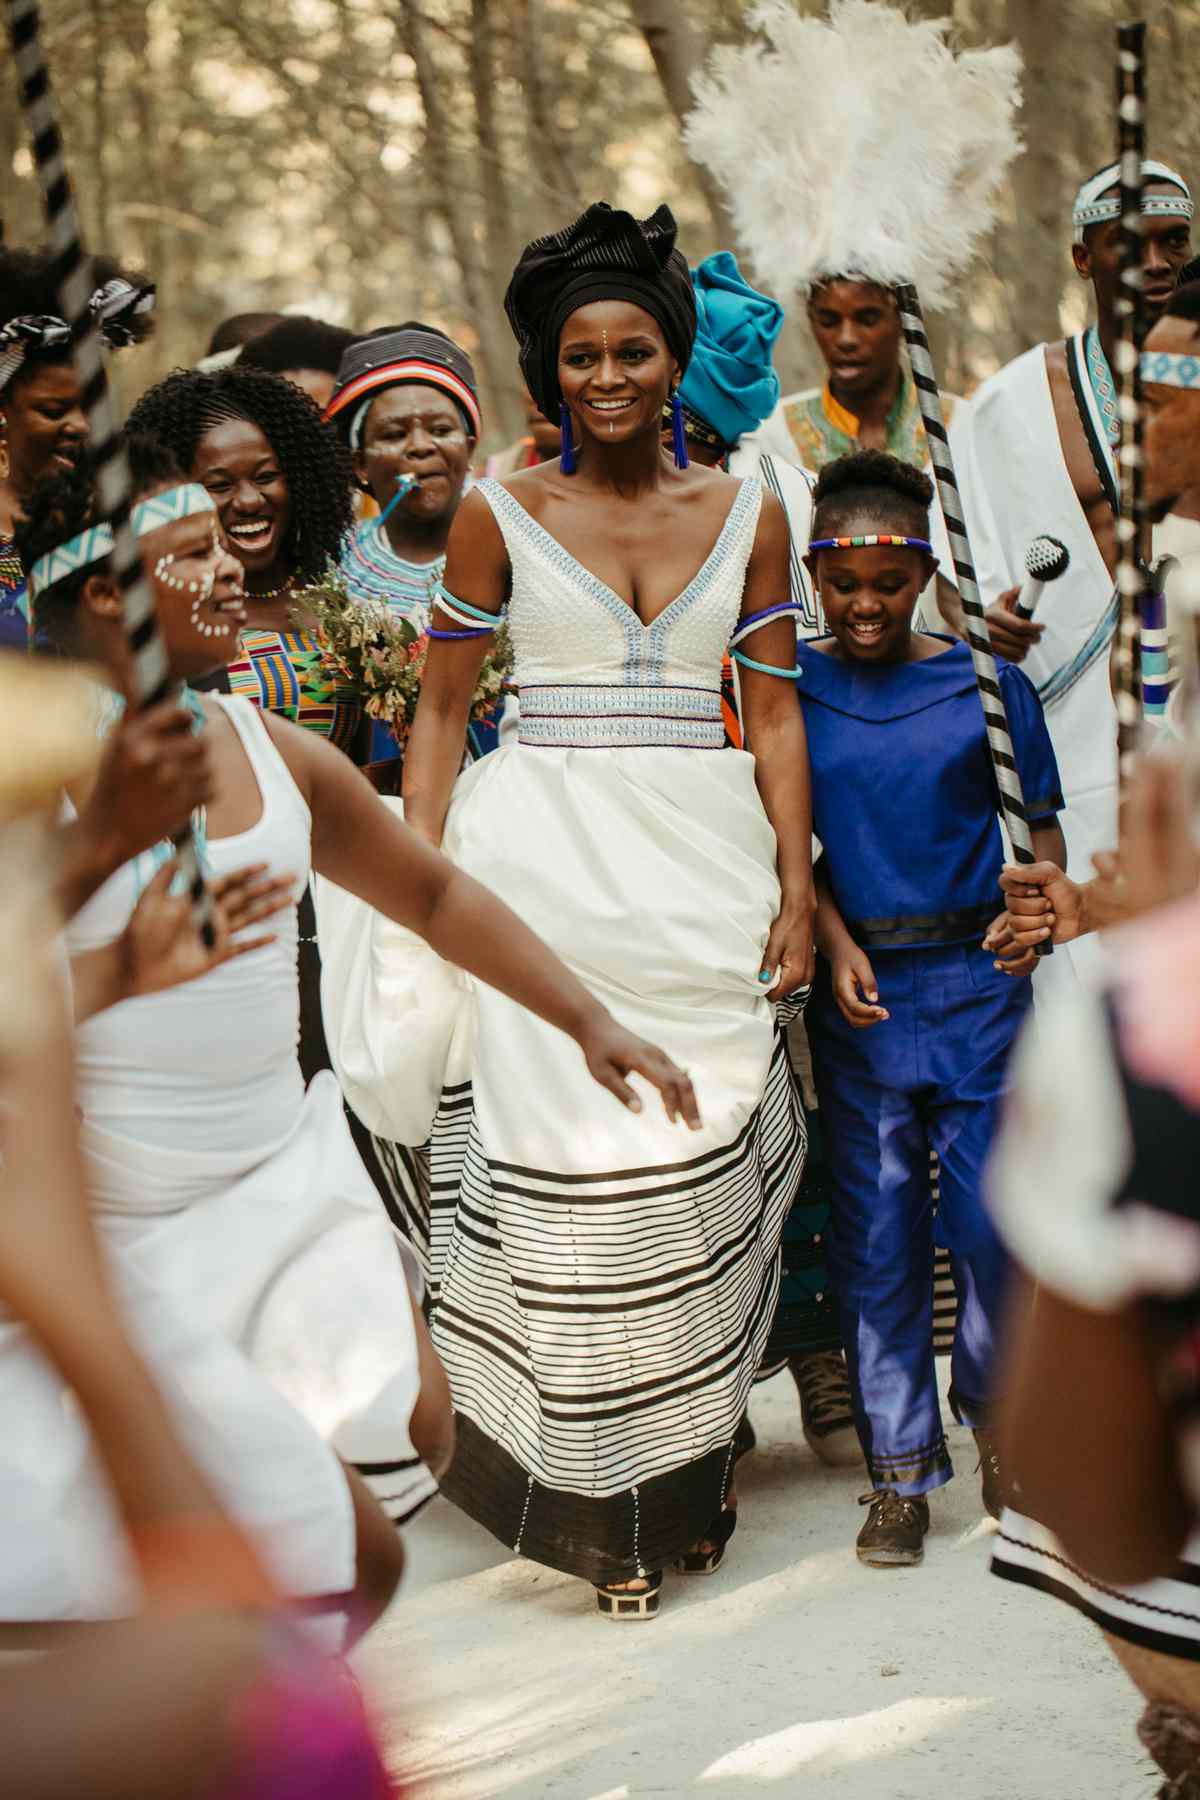 Check out this Authentic Xhosa Wedding at a Stunning Woodland in South Africa